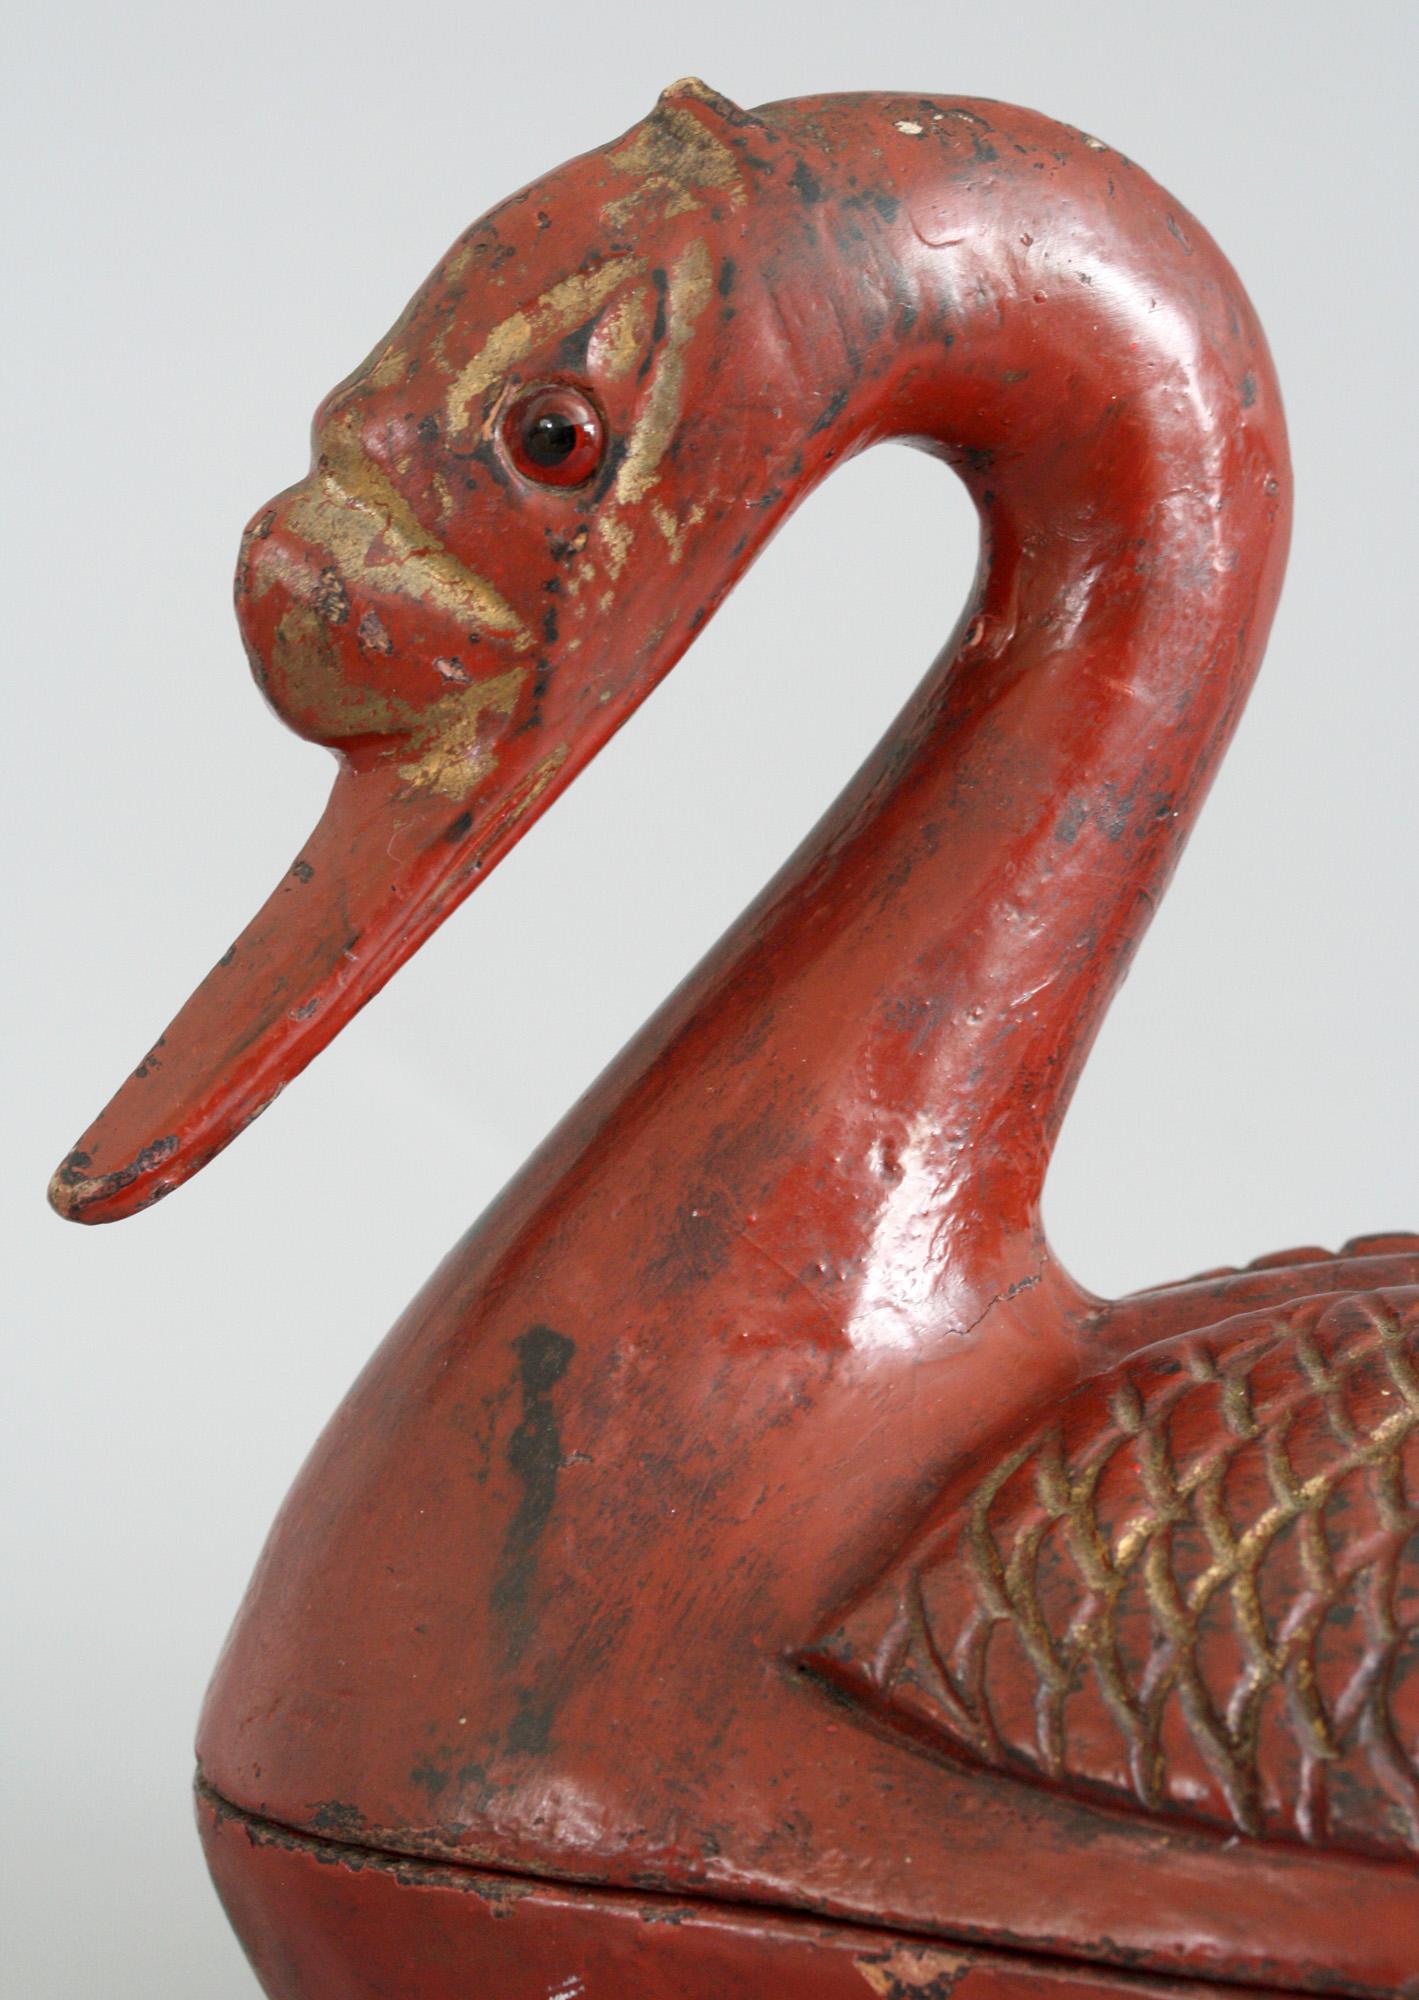 An unusual antique Chinese Qing red lacquered wooden lidded box modeled as a duck dating from the later 19th century. The duck is modeled seated with its legs resting beneath its body which forms the box. The cover is formed of the duck’s upper body